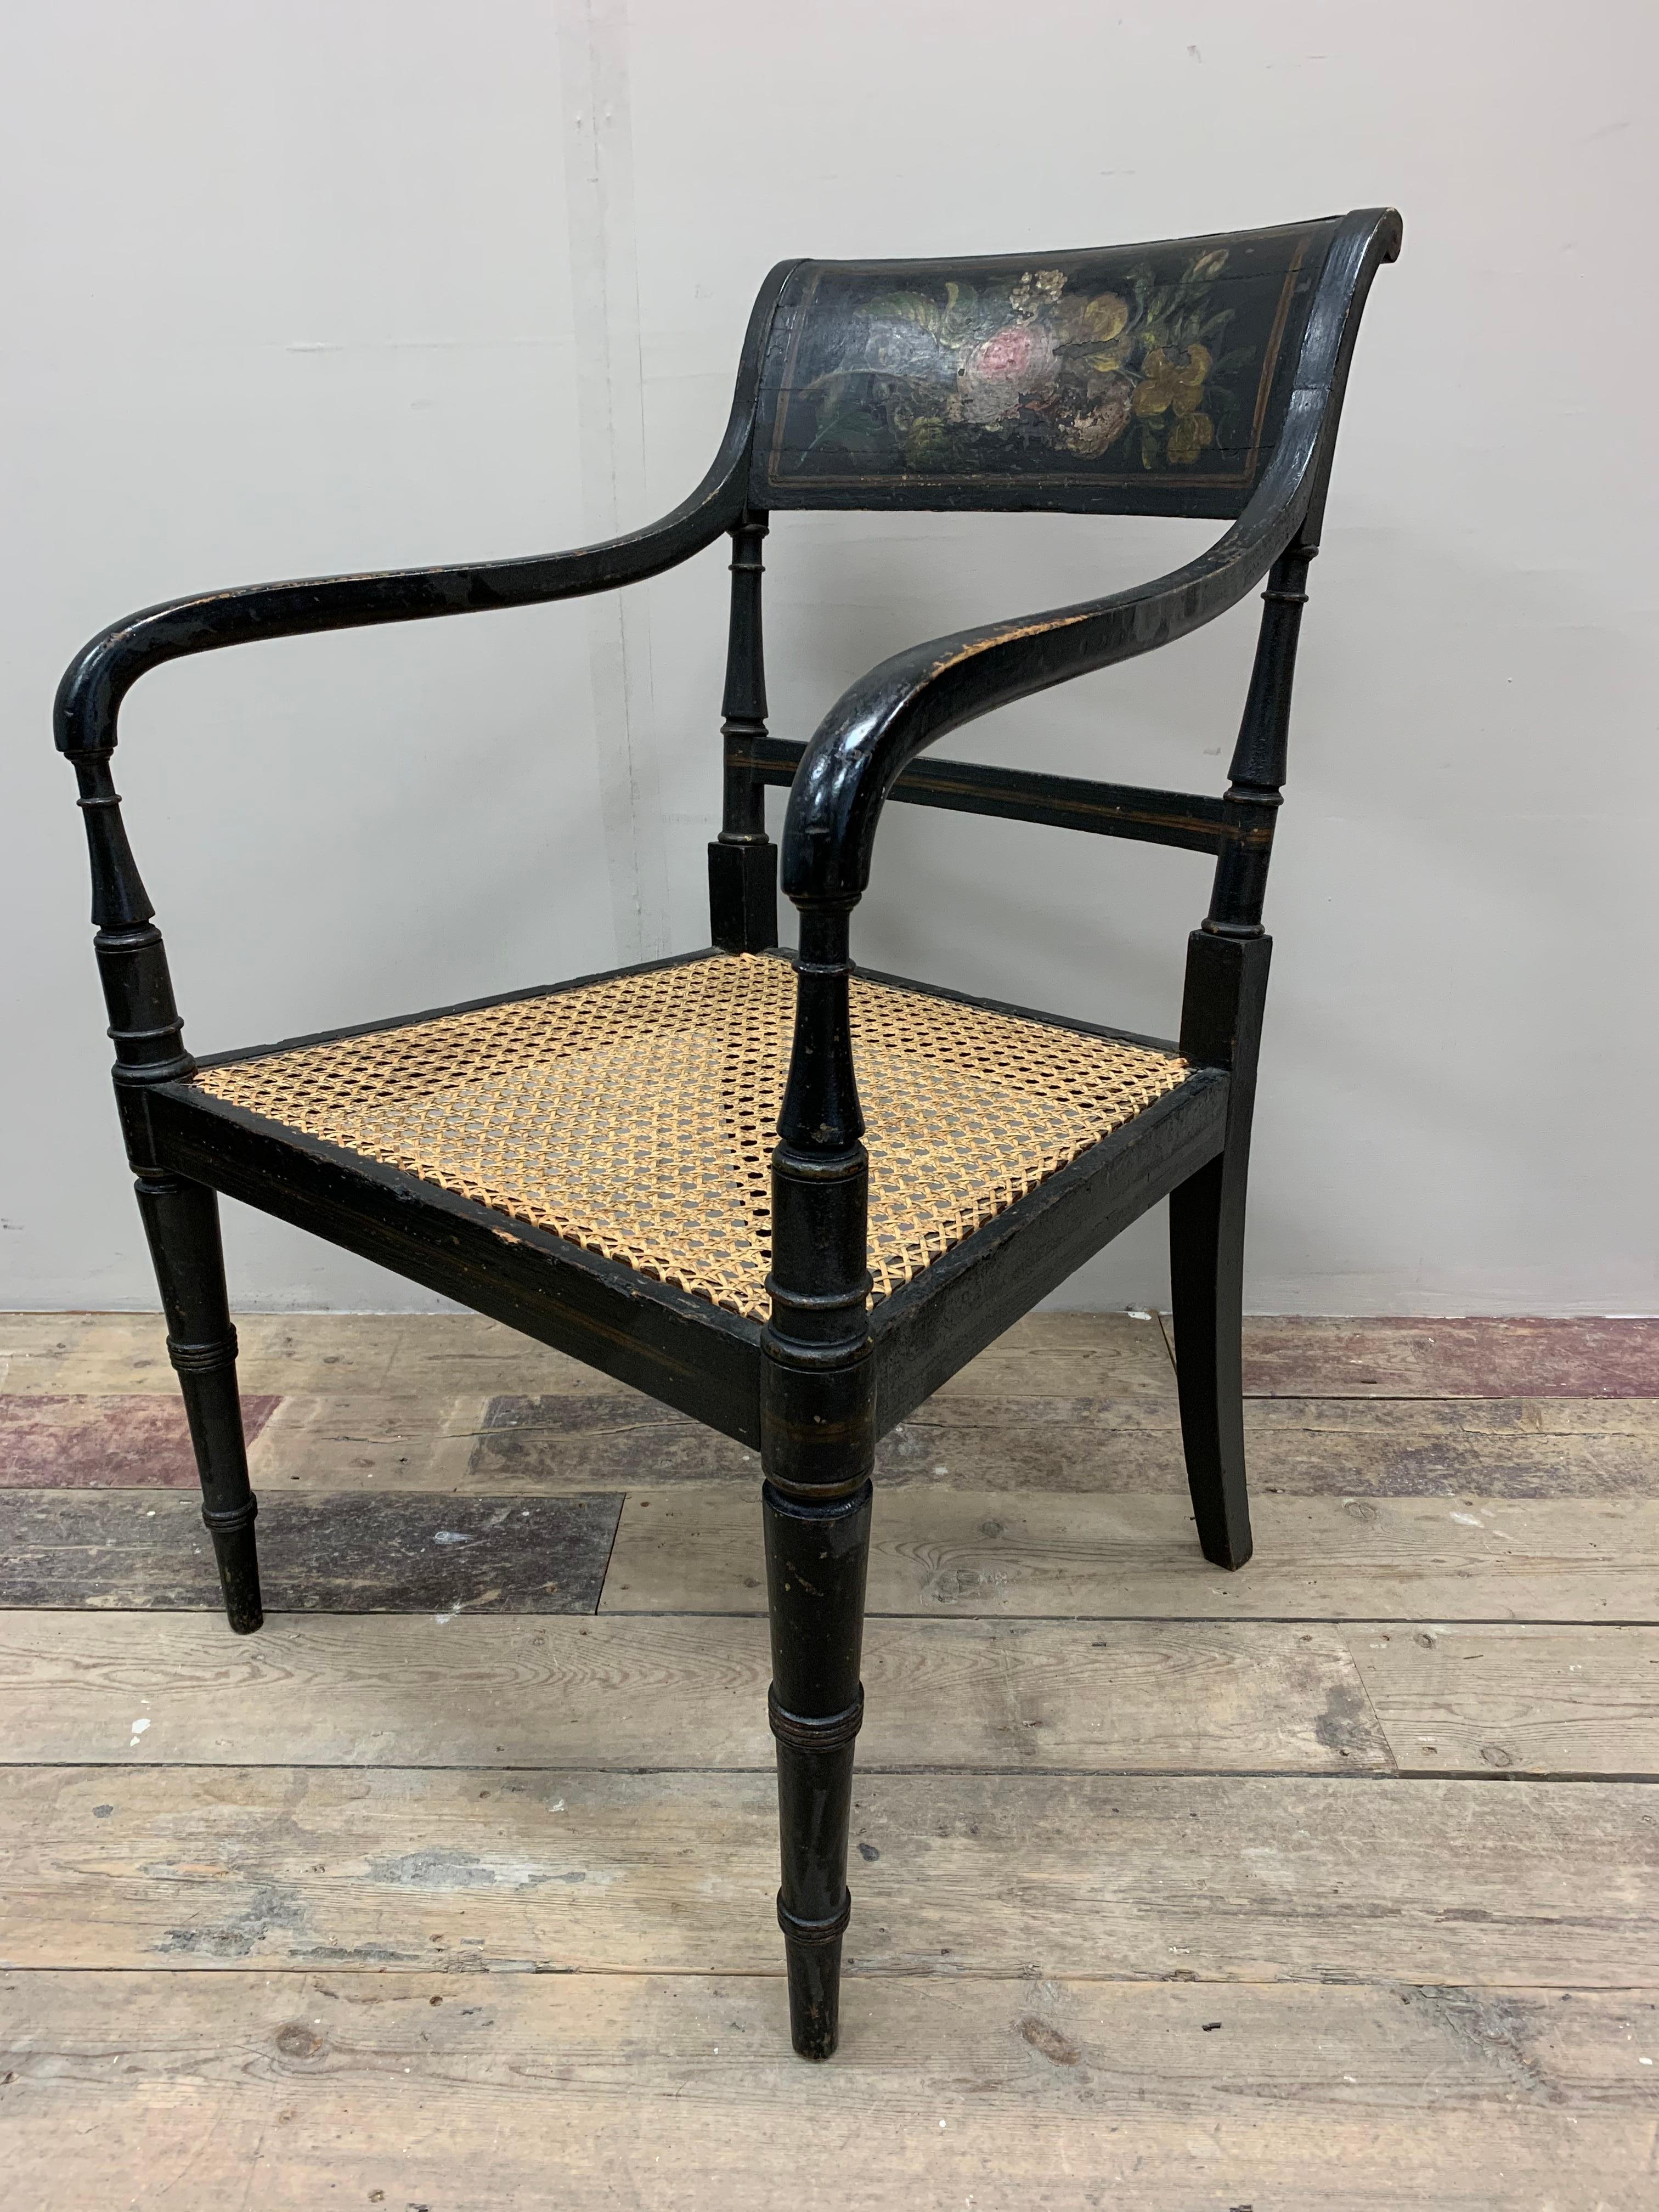 Regency C19th Century English Black Painted Armchair with Flower Decoration & Caned Seat For Sale